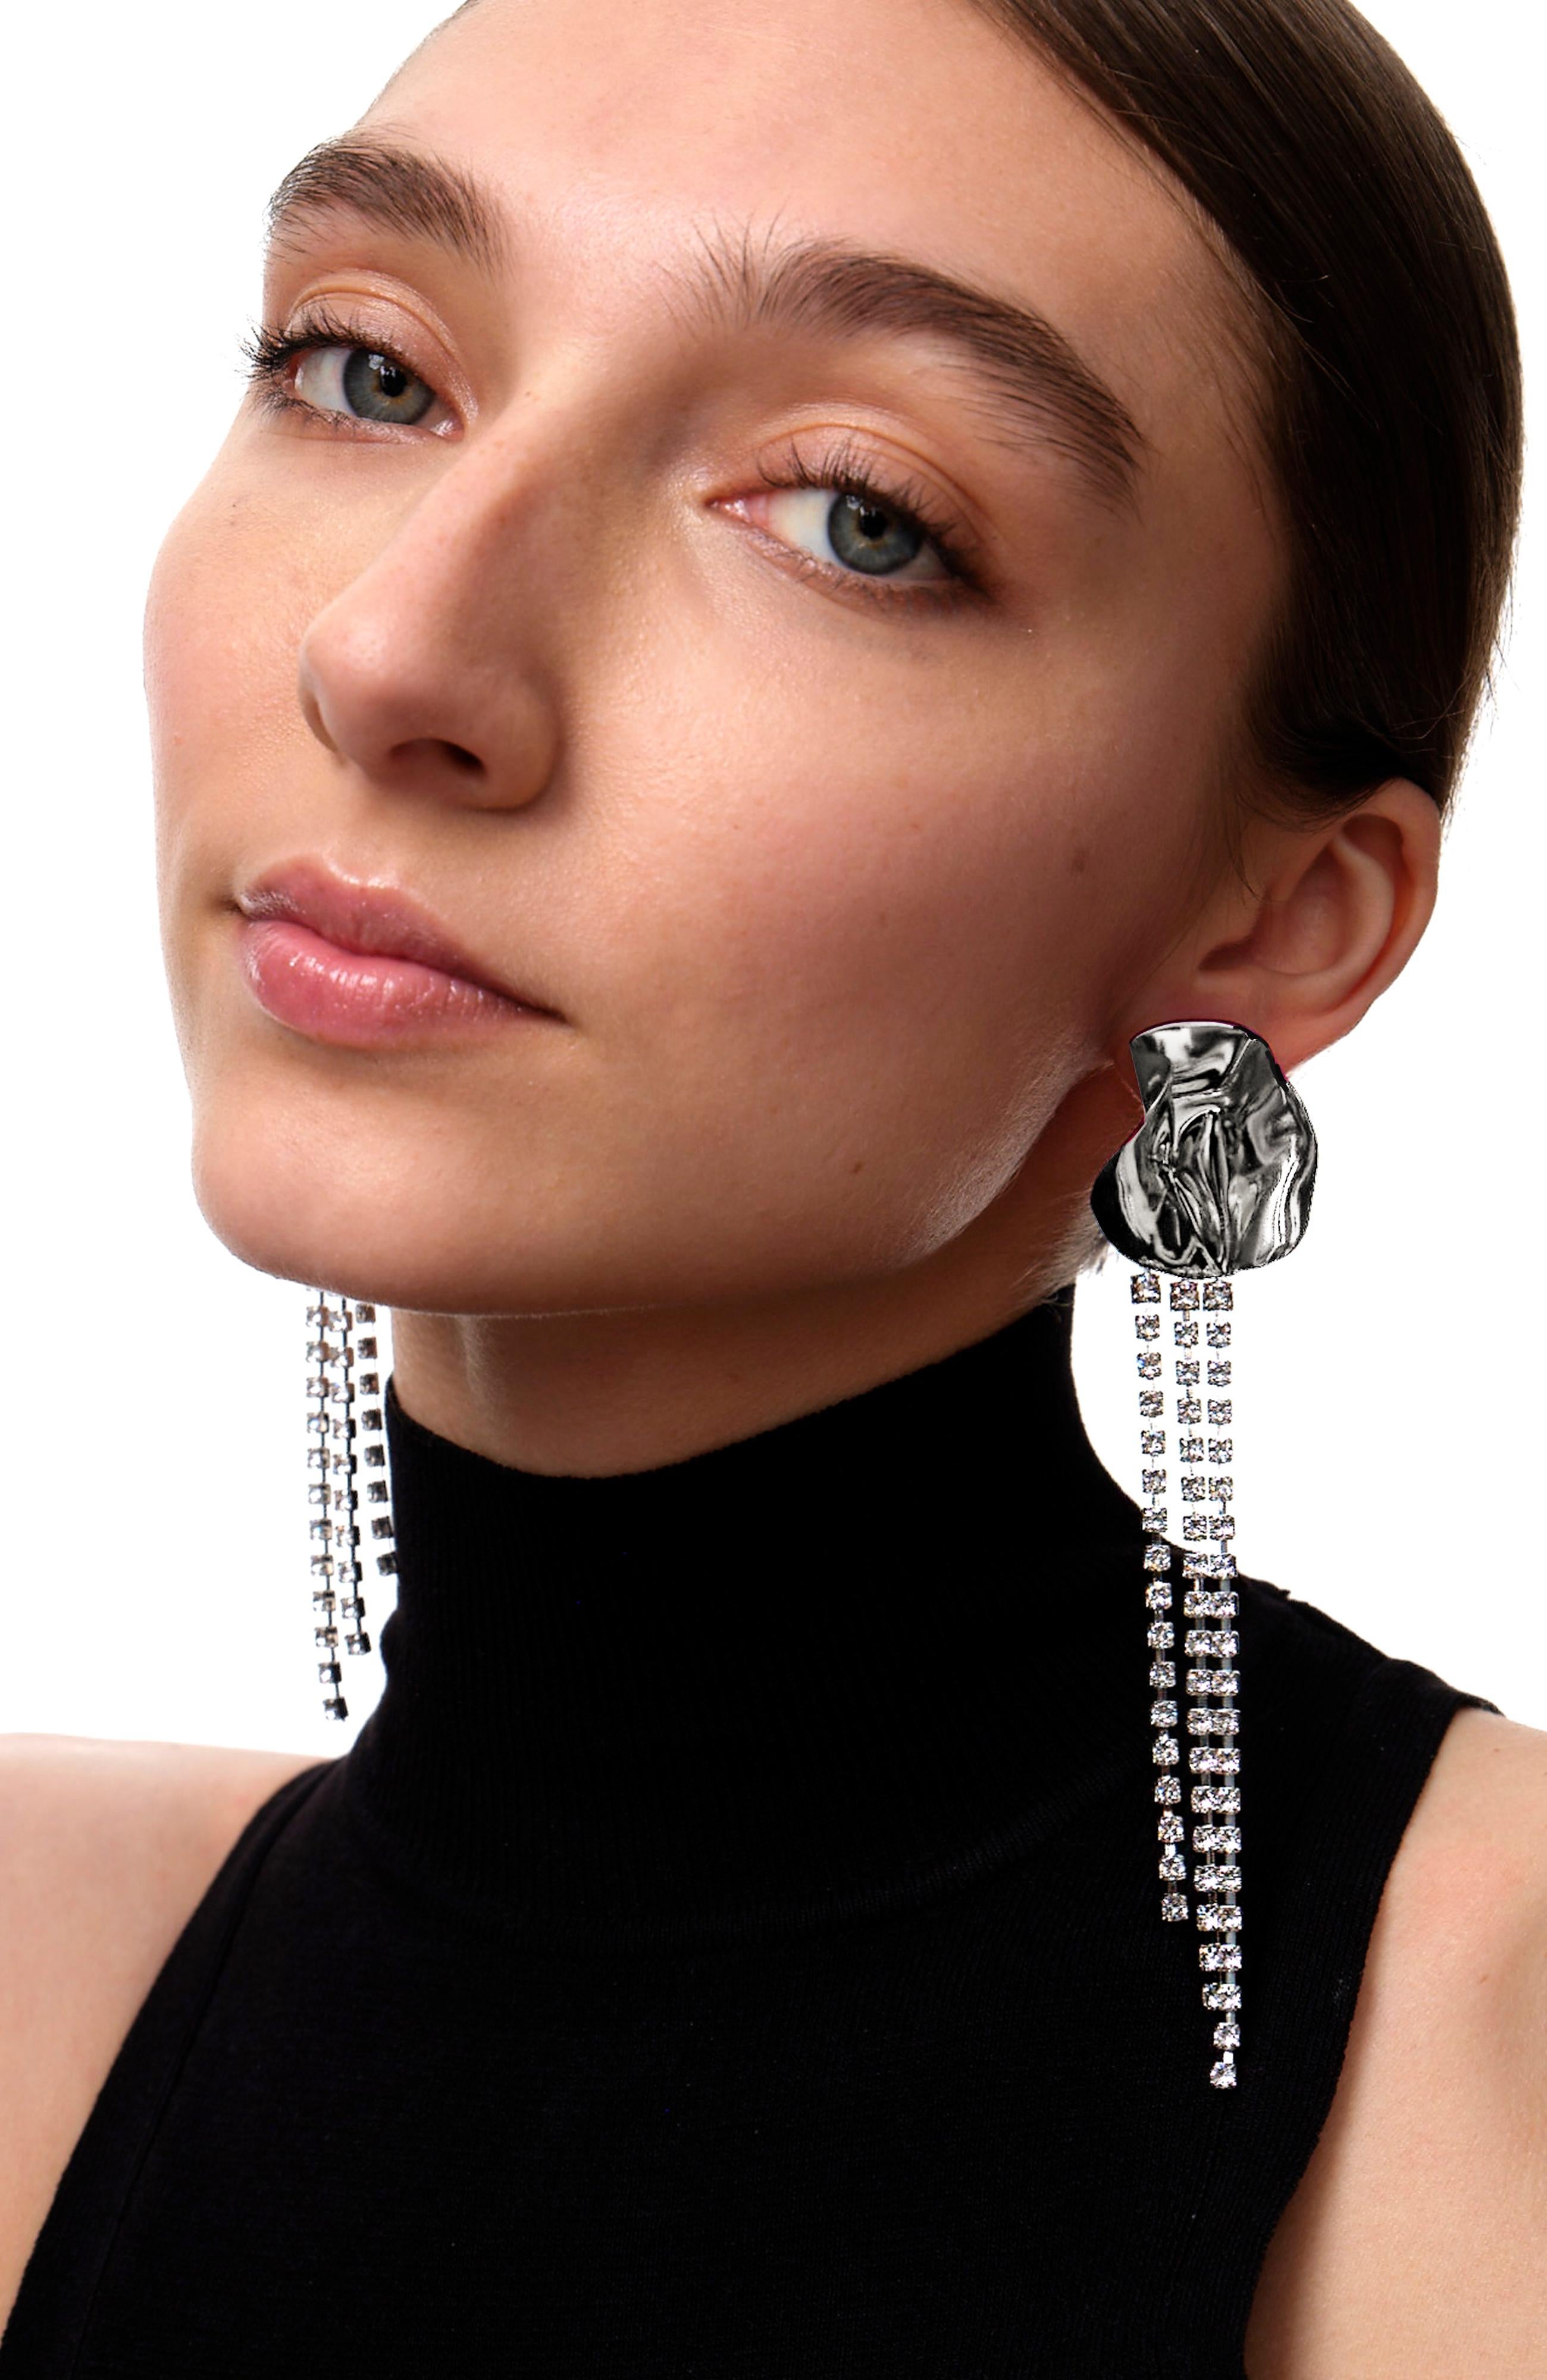 The Georgia crystal-embellished earrings from Sterling King feature a sculptural shape embellished with cascading clear crystals. Inspired by the works of Georgia O'Keeffe, these floral-inspired earrings are cast in sterling silver. Lightweight and